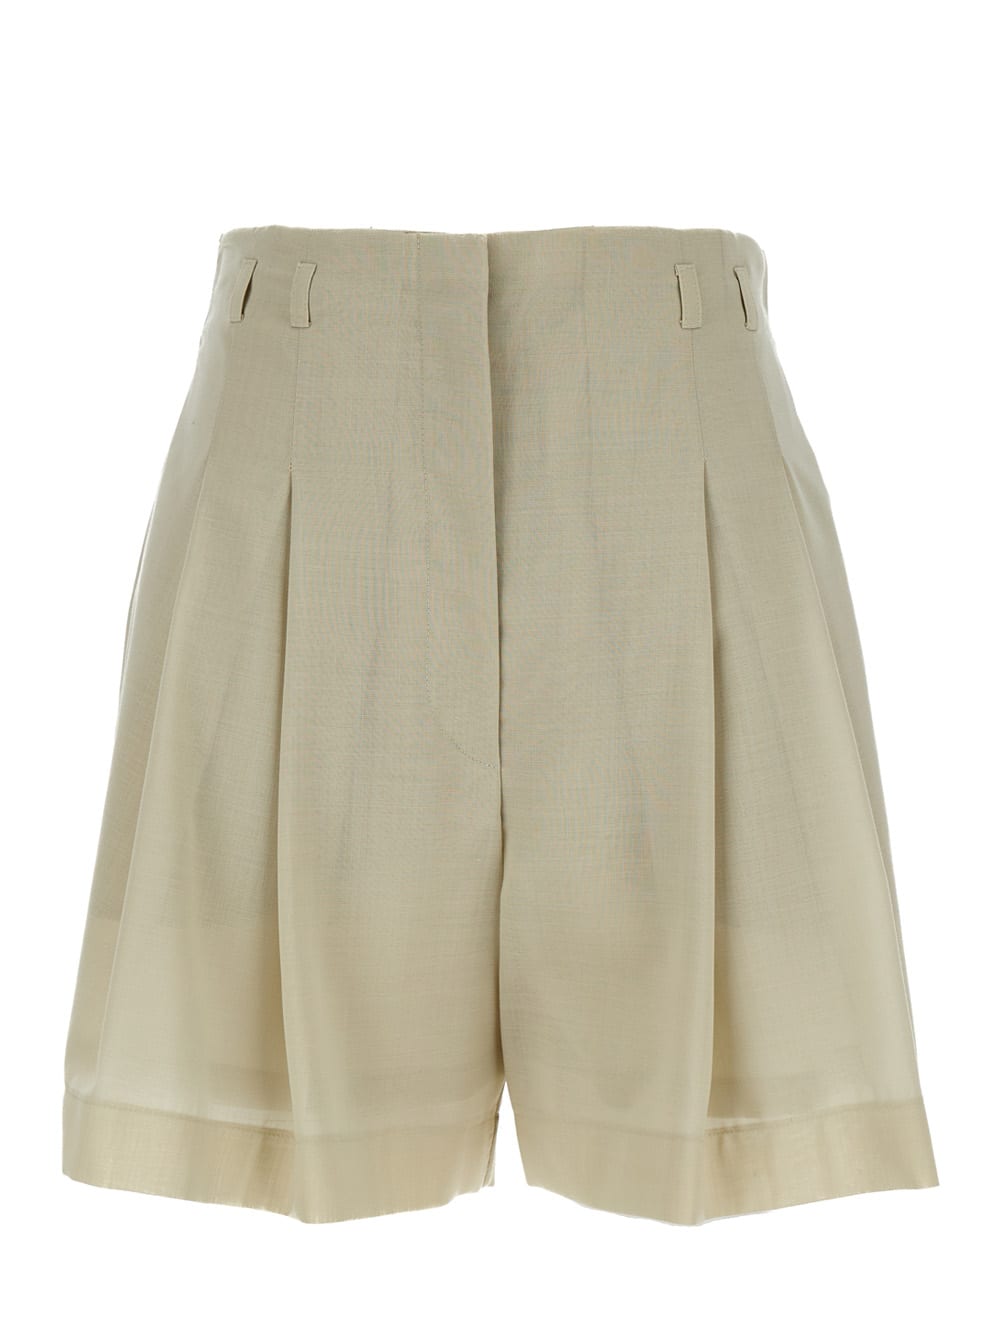 Voile Shorts